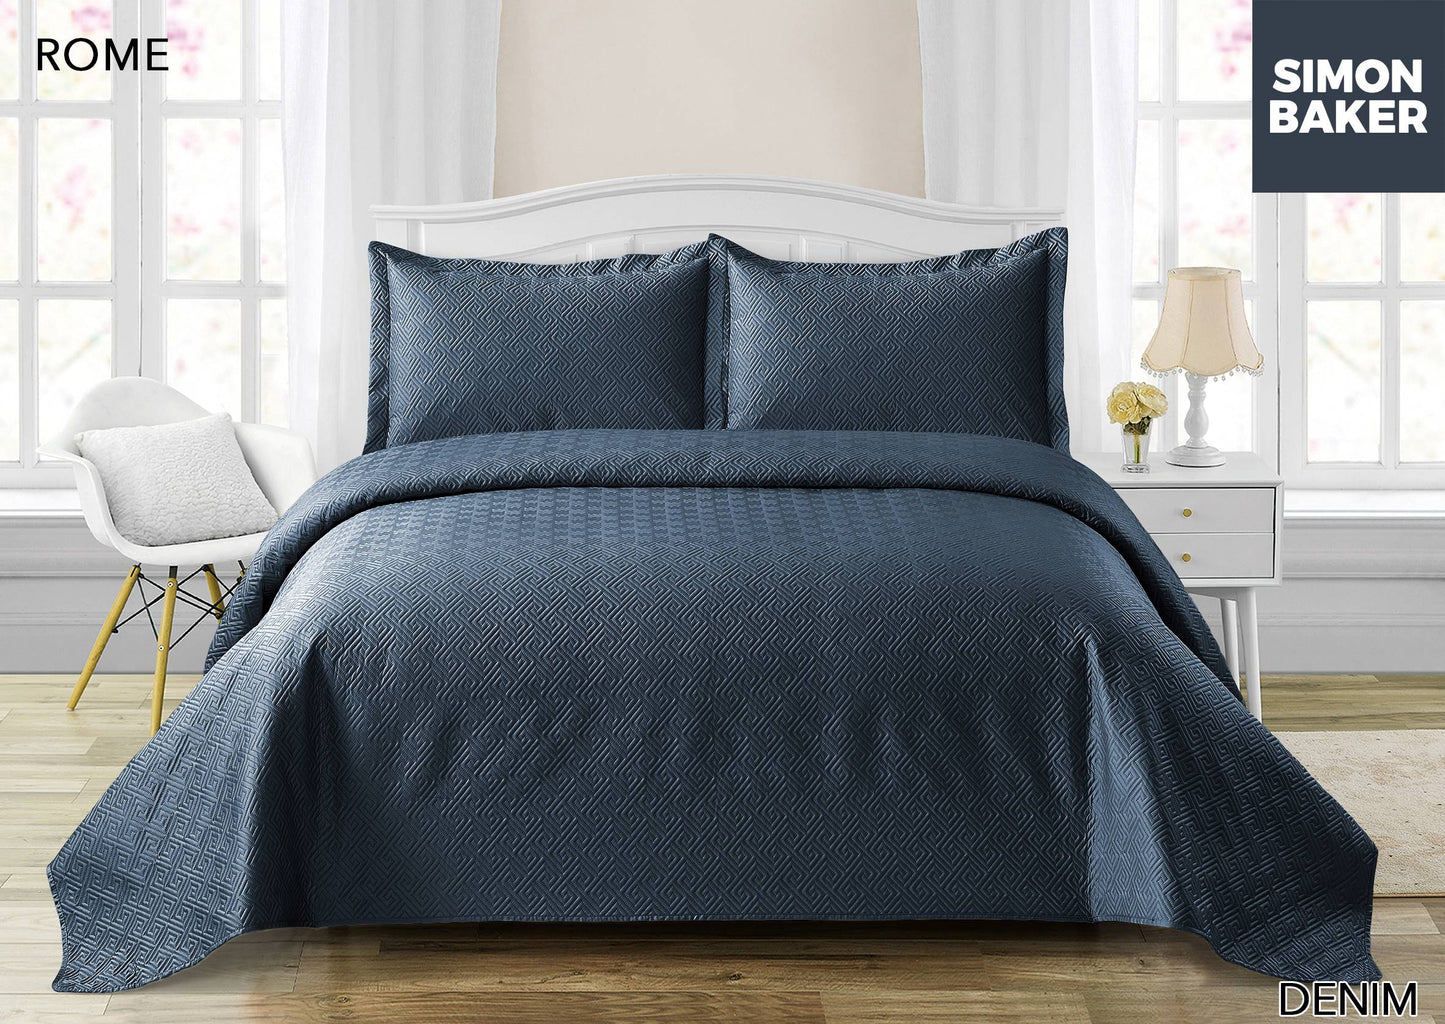 Rome Pin-Quilt Bedspread